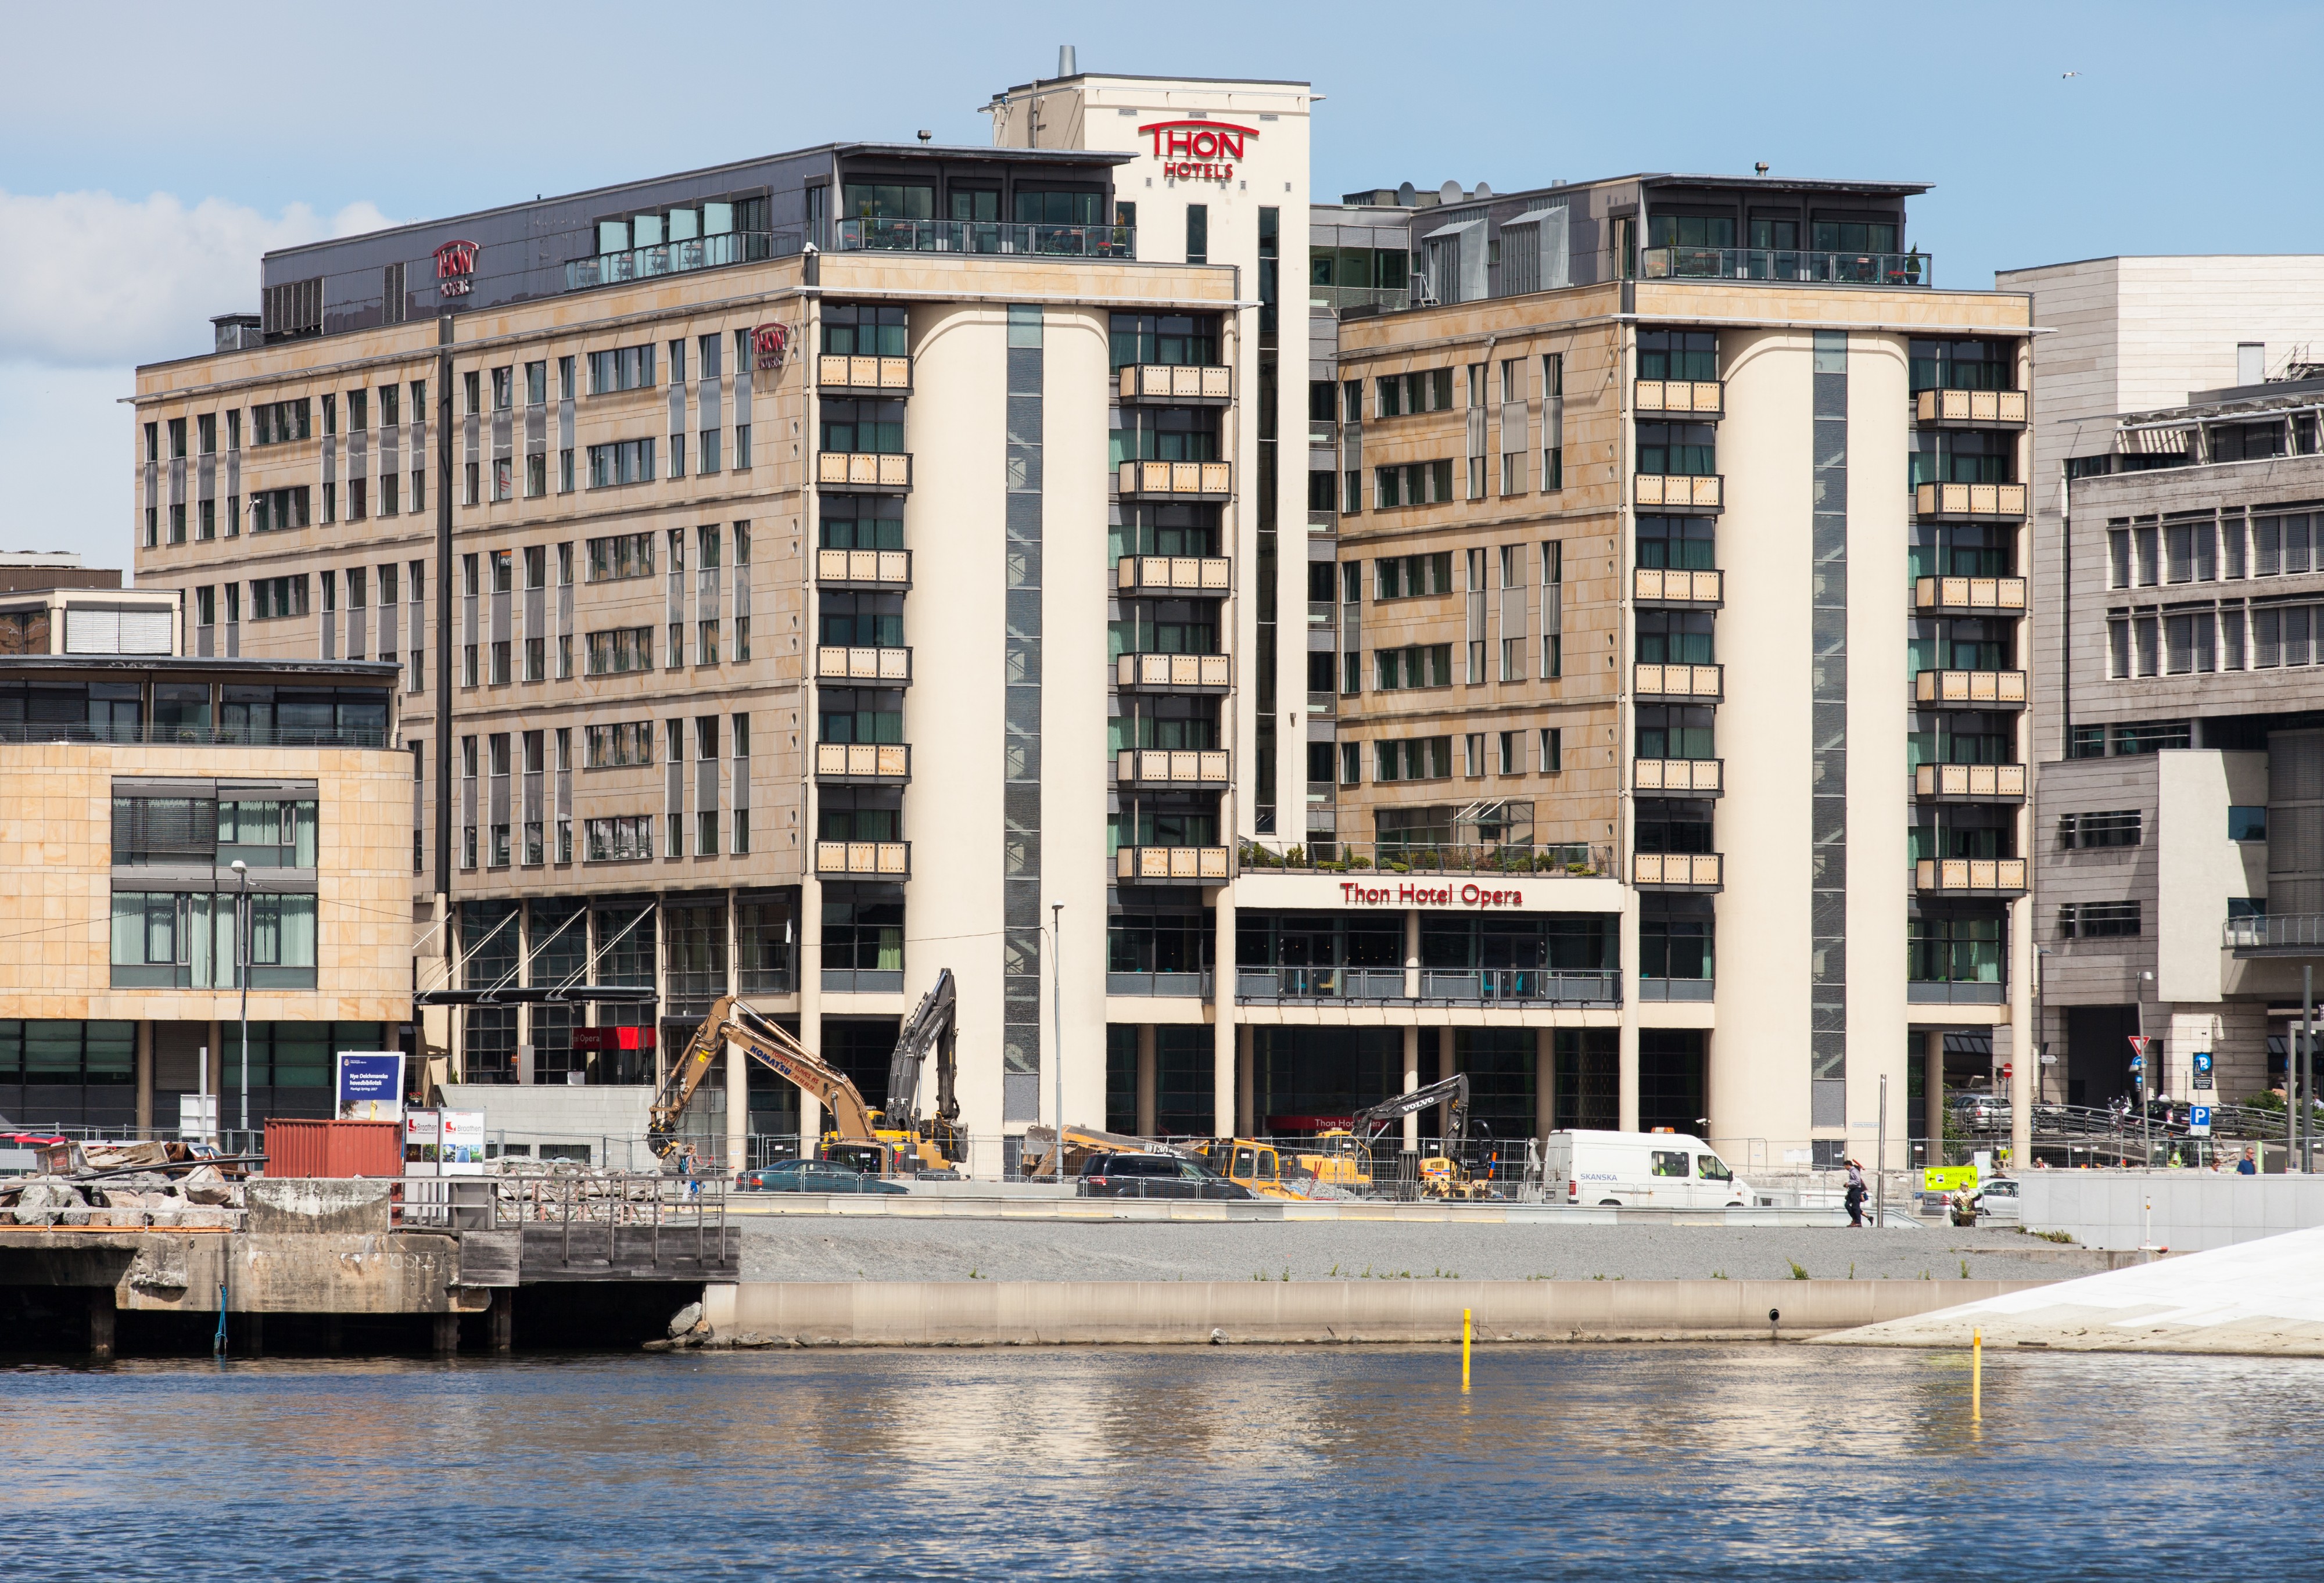 a Thon hotel in Oslo city, Norway, June 2014, picture 11